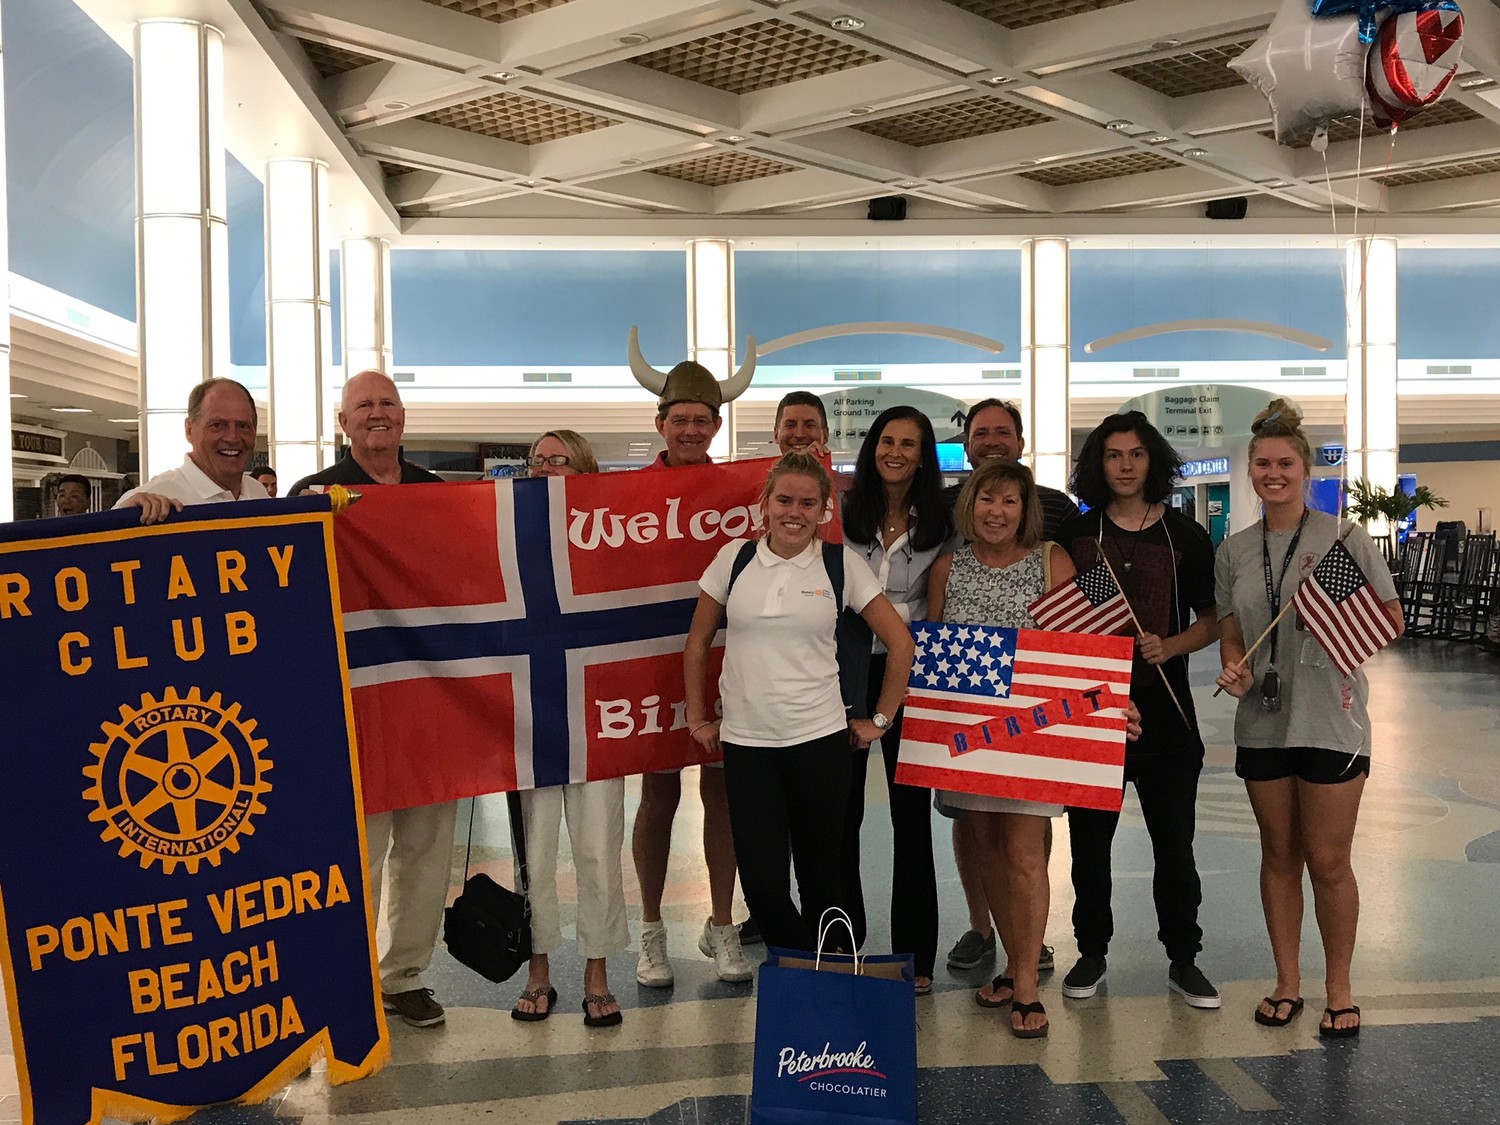 Members of the Rotary Club of Ponte Vedra Beach welcome Youth Exchange Students Zed and Birgit at the Jacksonville International Airport last week. Zed, who is from Hungary, and Birgit, who is from Norway, will be spending the next academic year in the U.S. as participants of the Rotary Youth Exchange Scholarship Program.